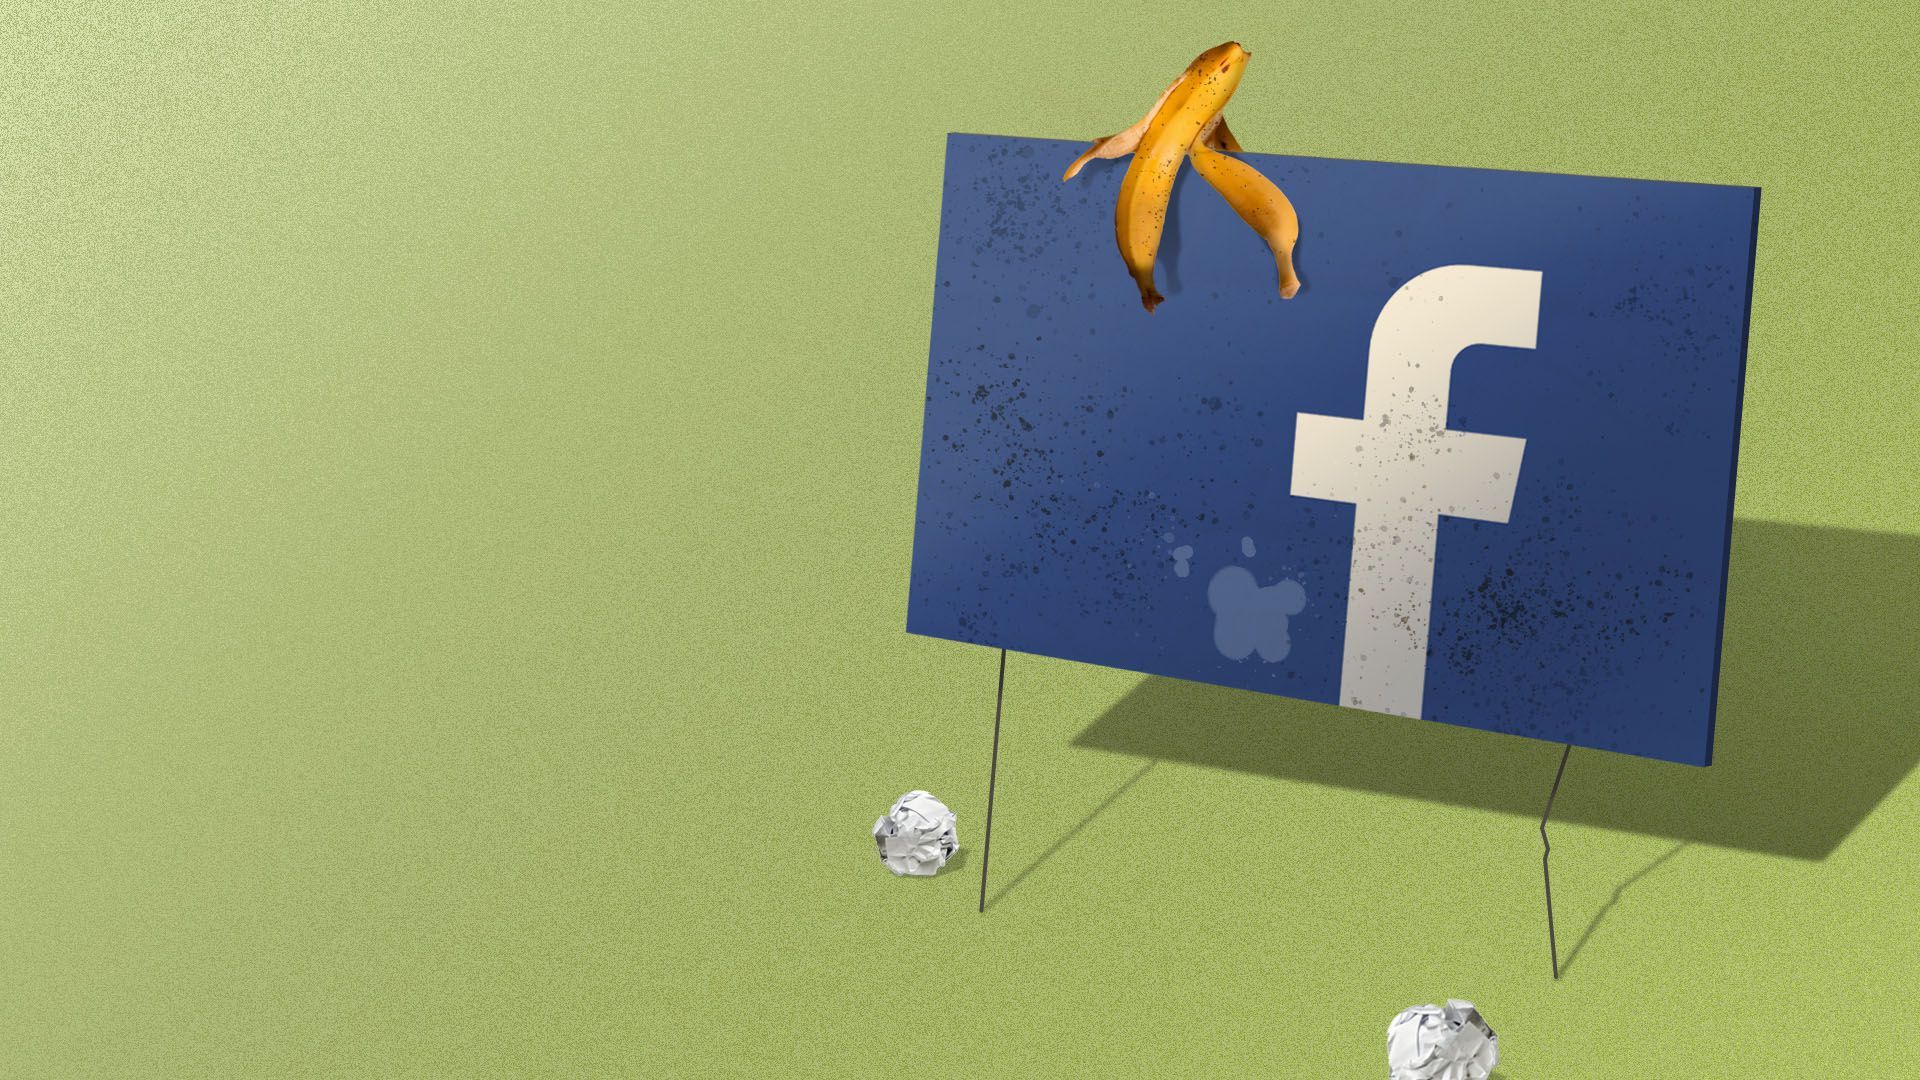 Illustration of a damaged political lawn sign with the facebook logo